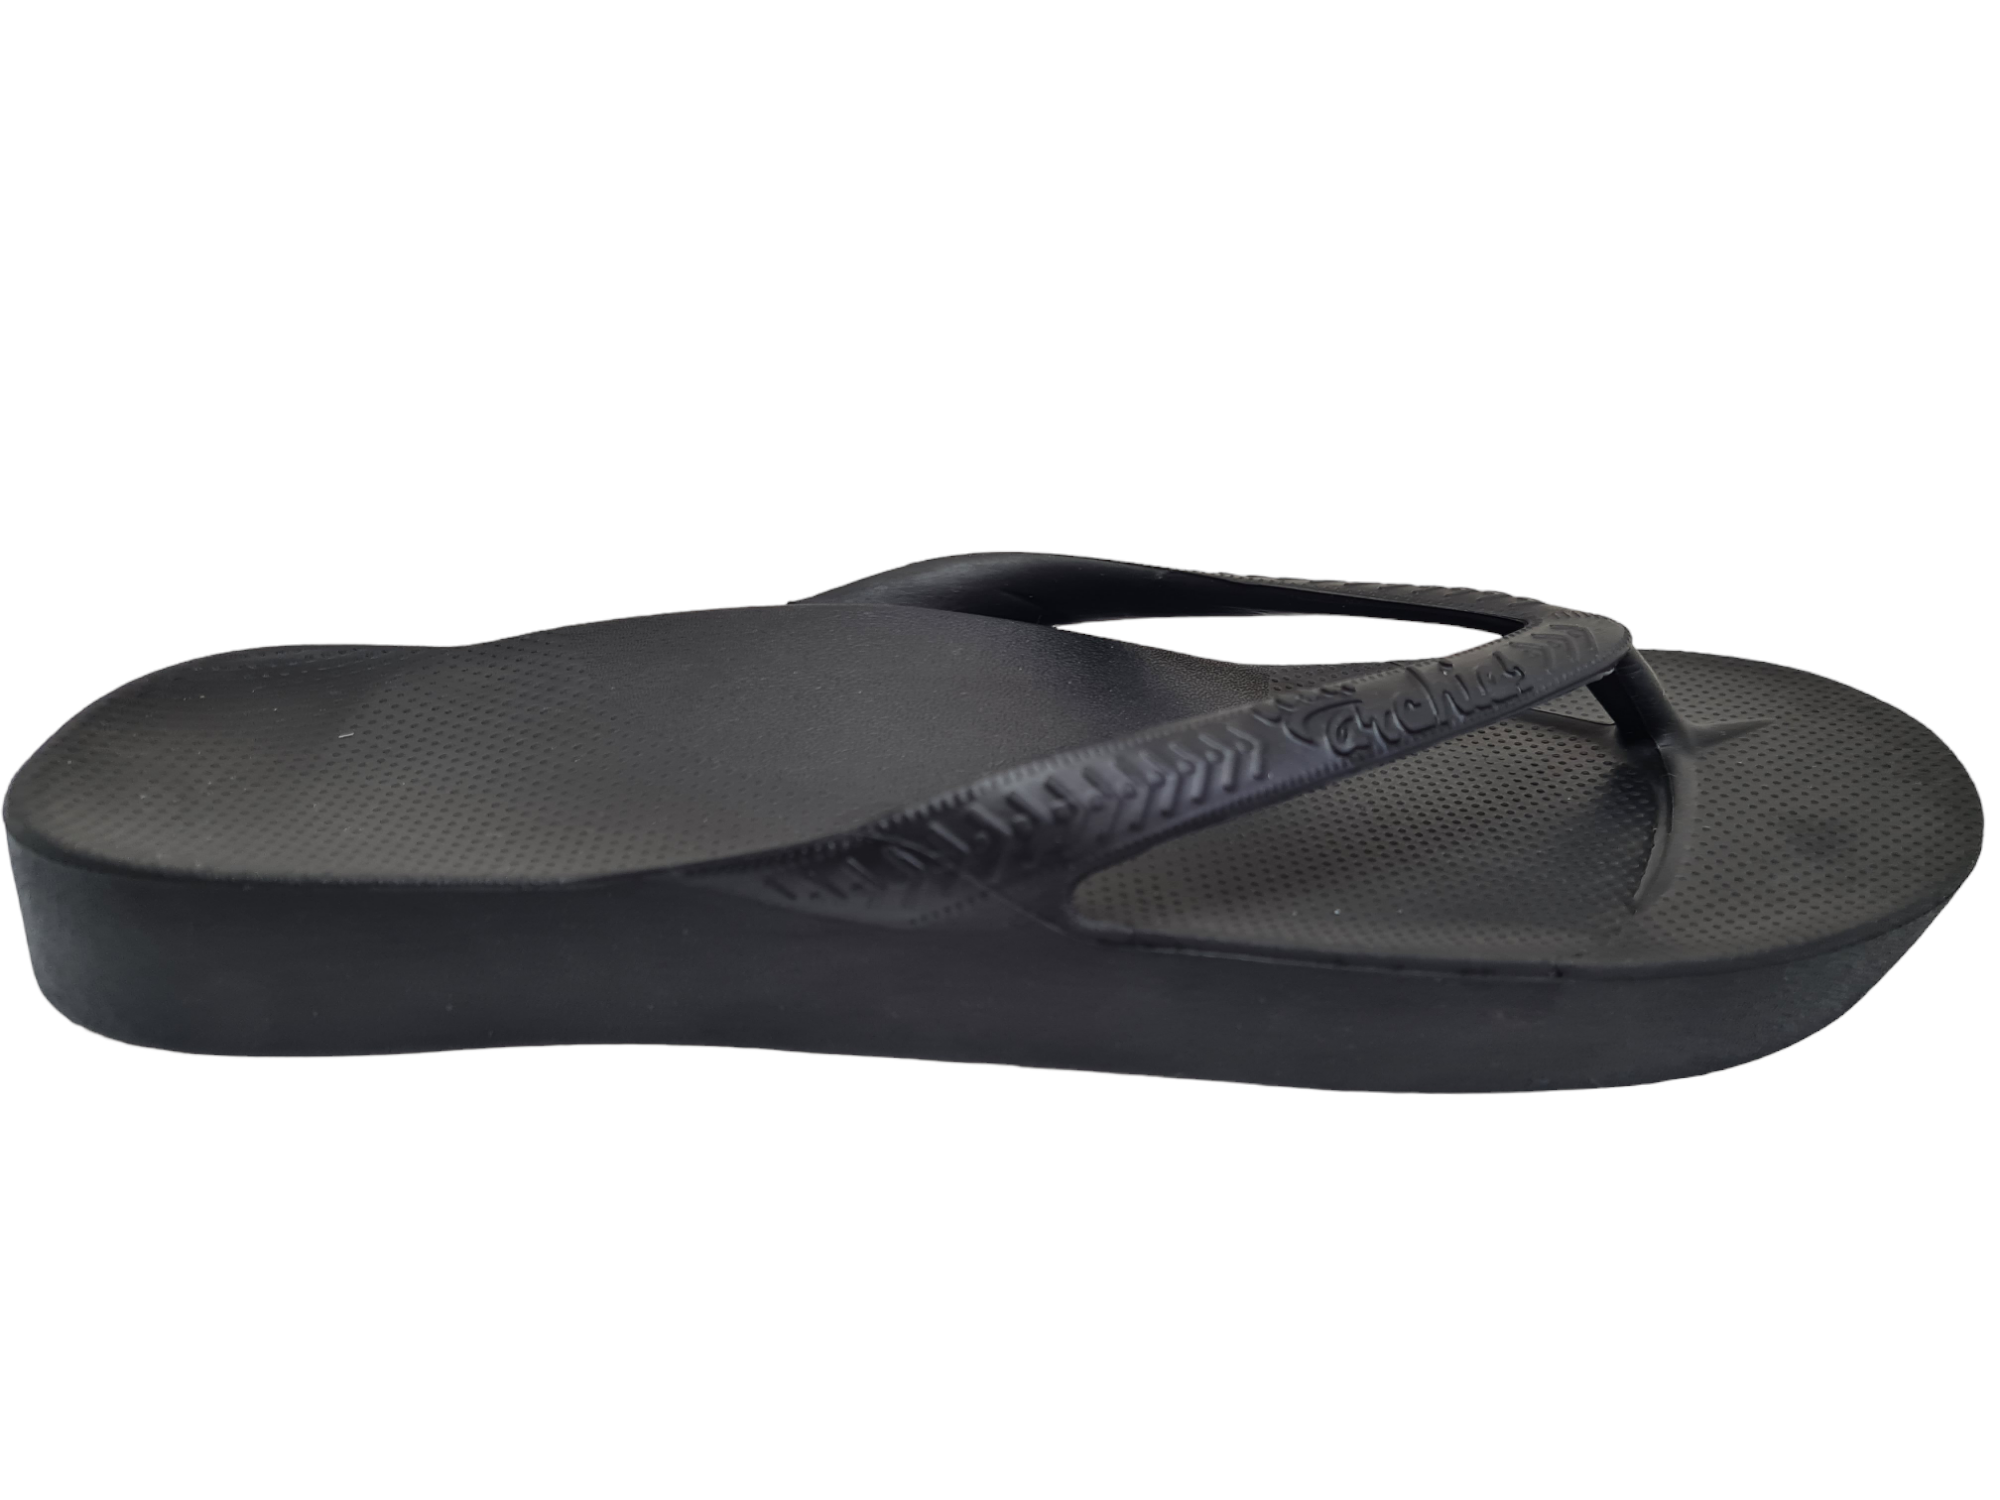 Archies Are Back In Stock!  Our best-selling Archies Arch Support